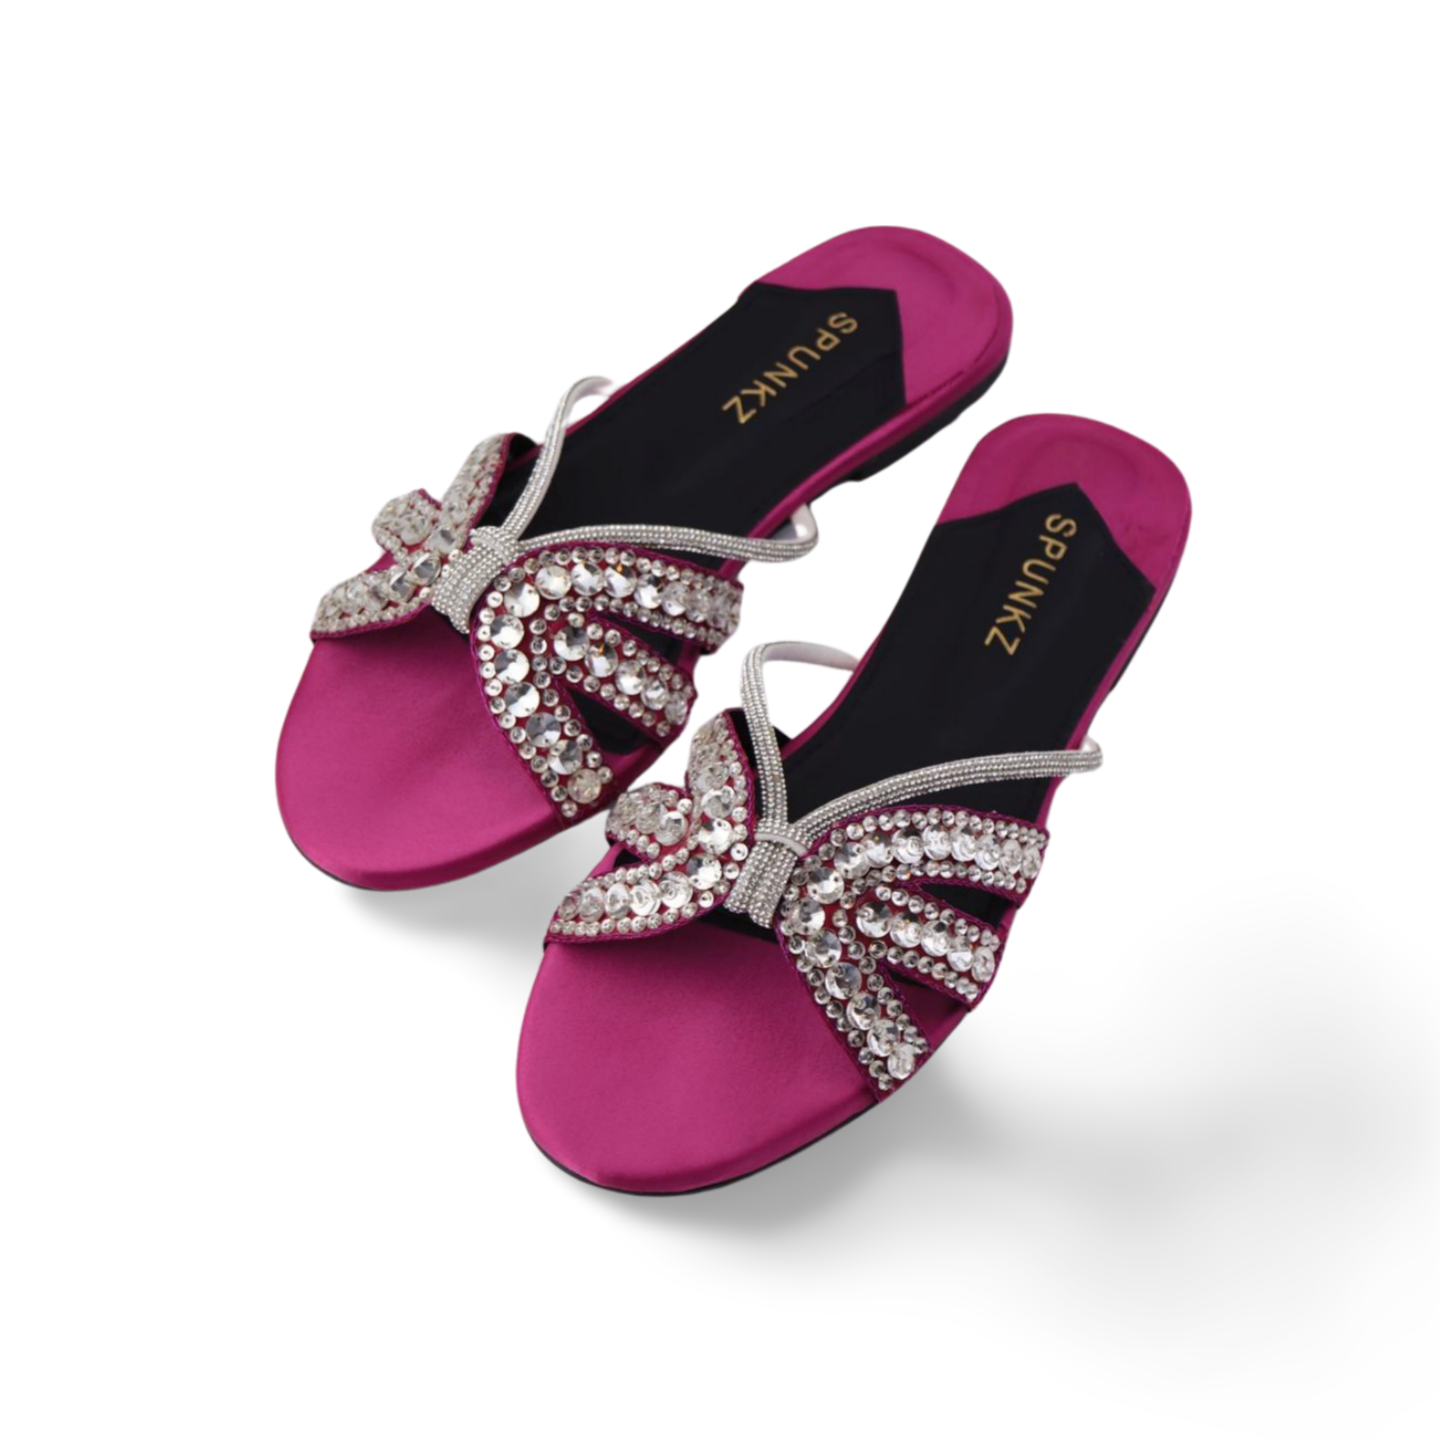 Spunkz Rhinestone Strap Flat Sandals - Stylish and Comfortable for Any Occasion